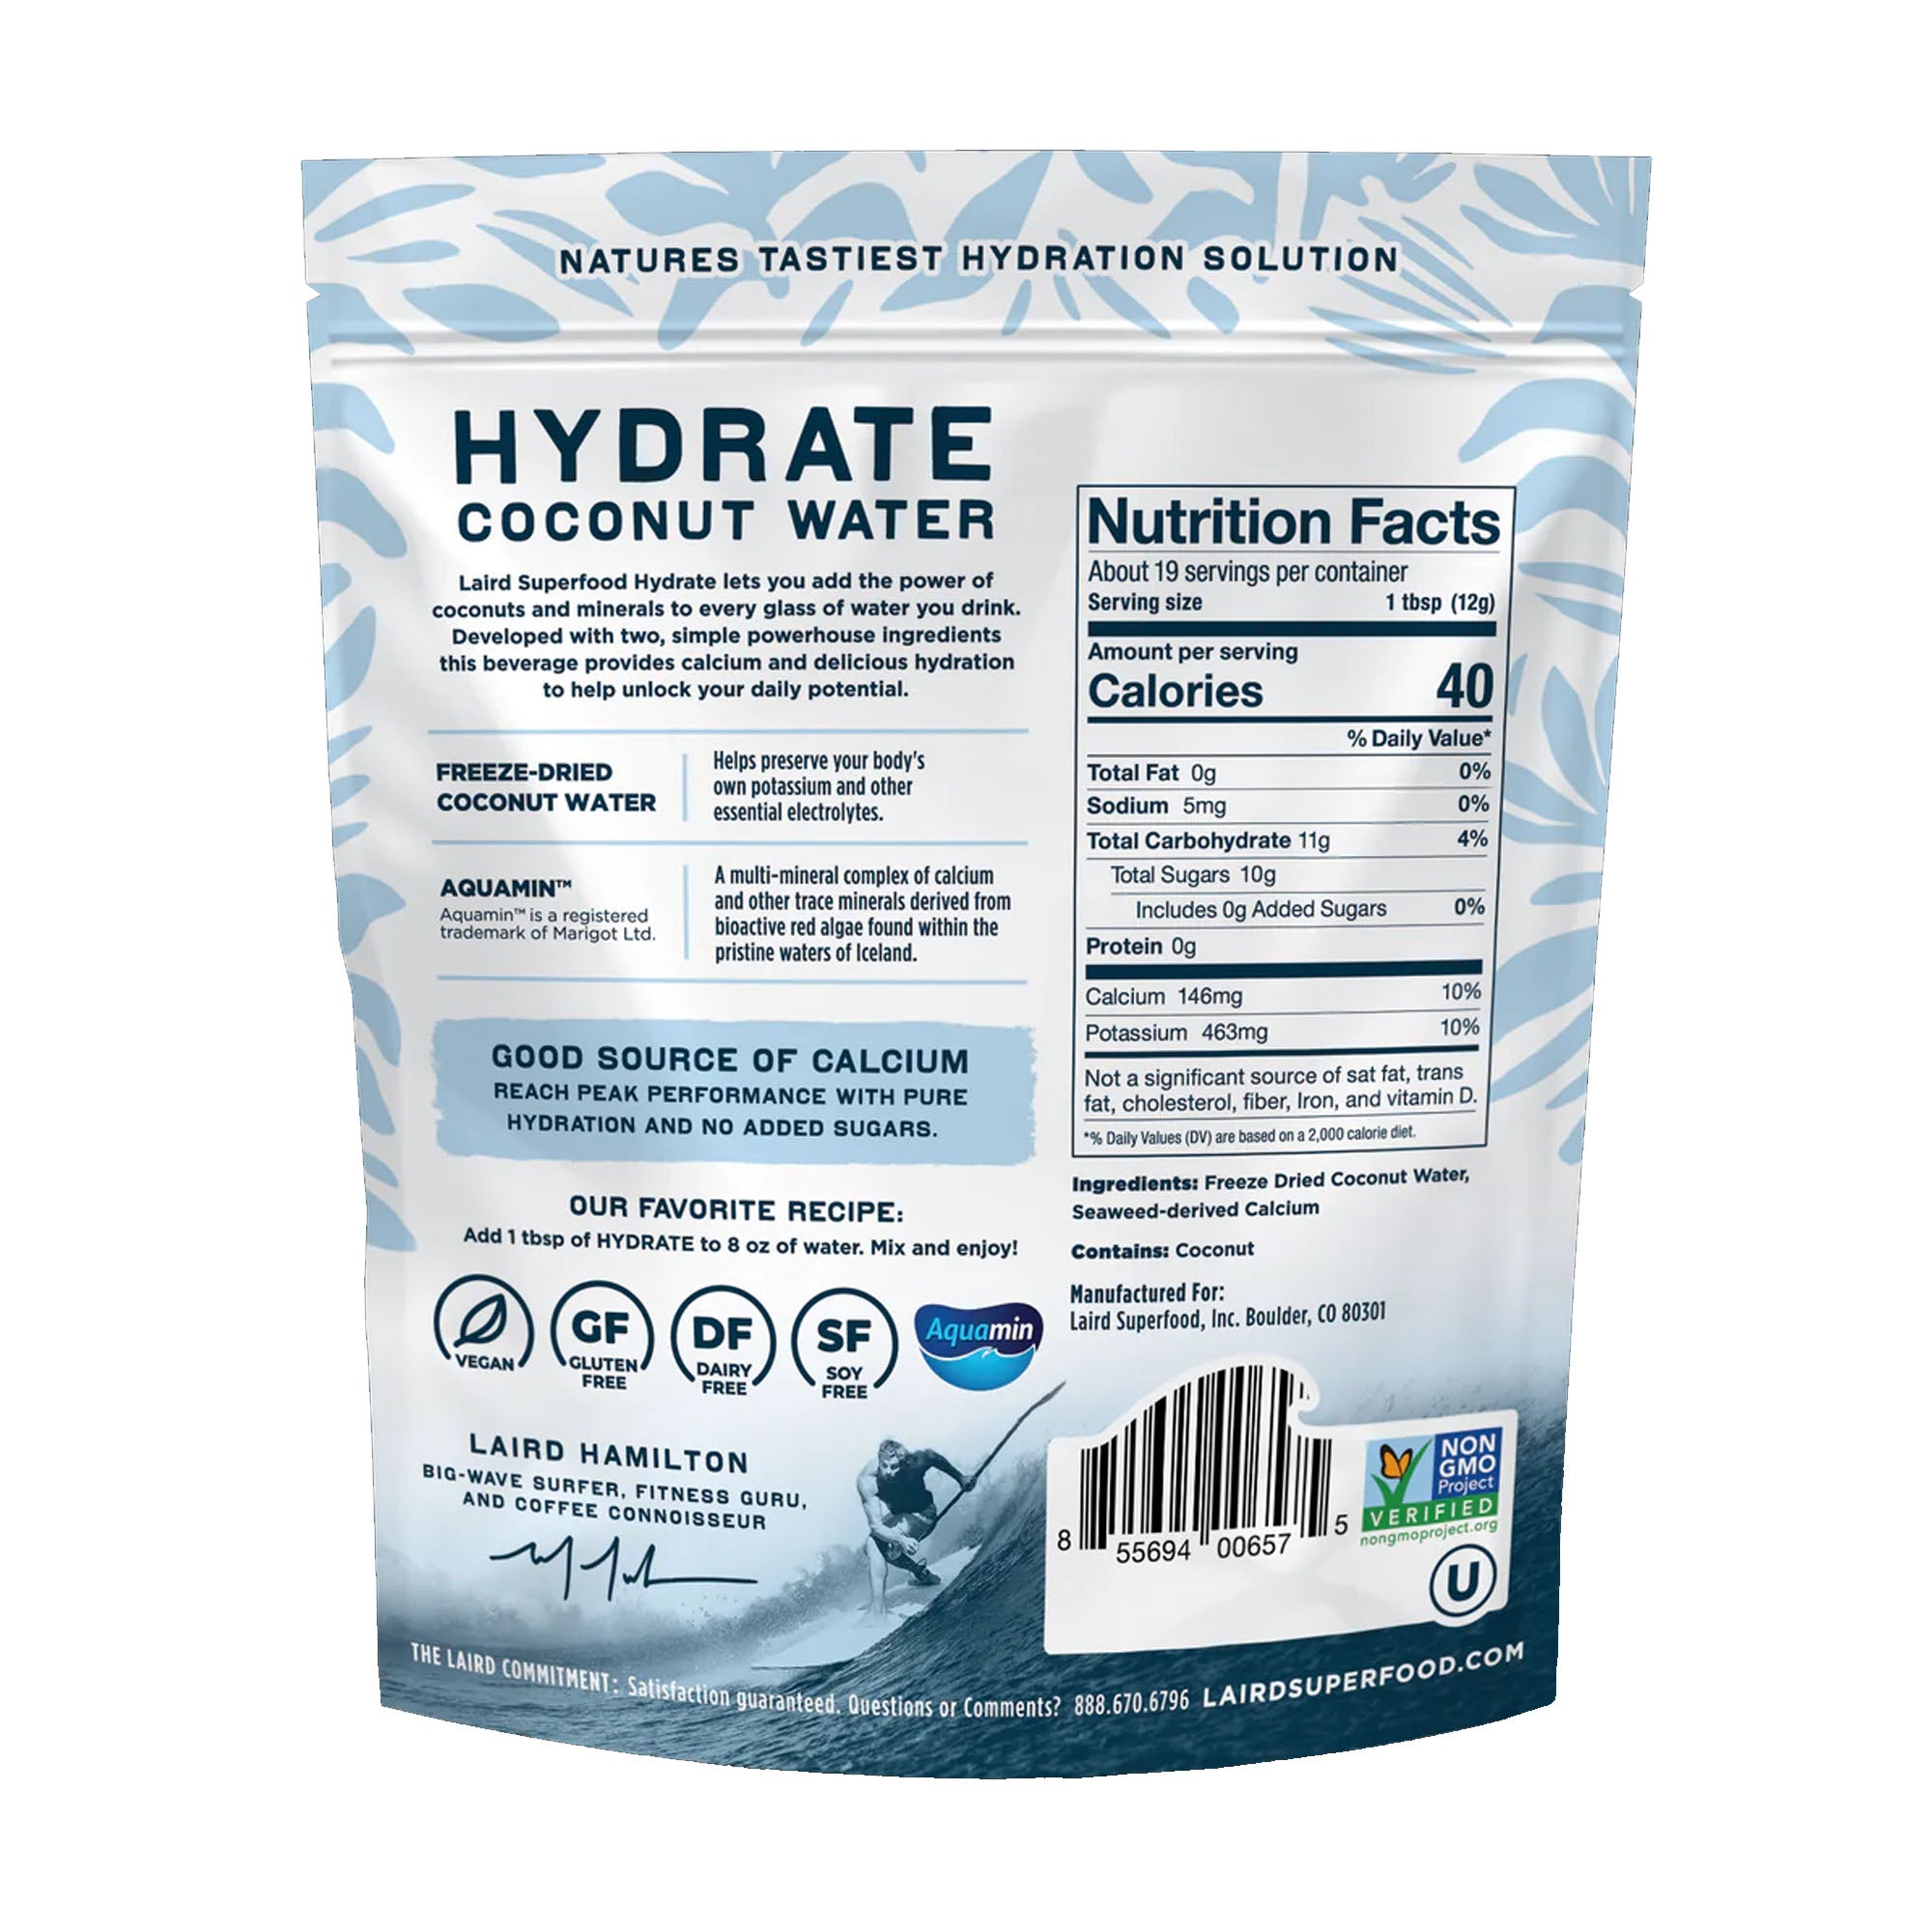 Laird Superfood Hydrate Coconut Water